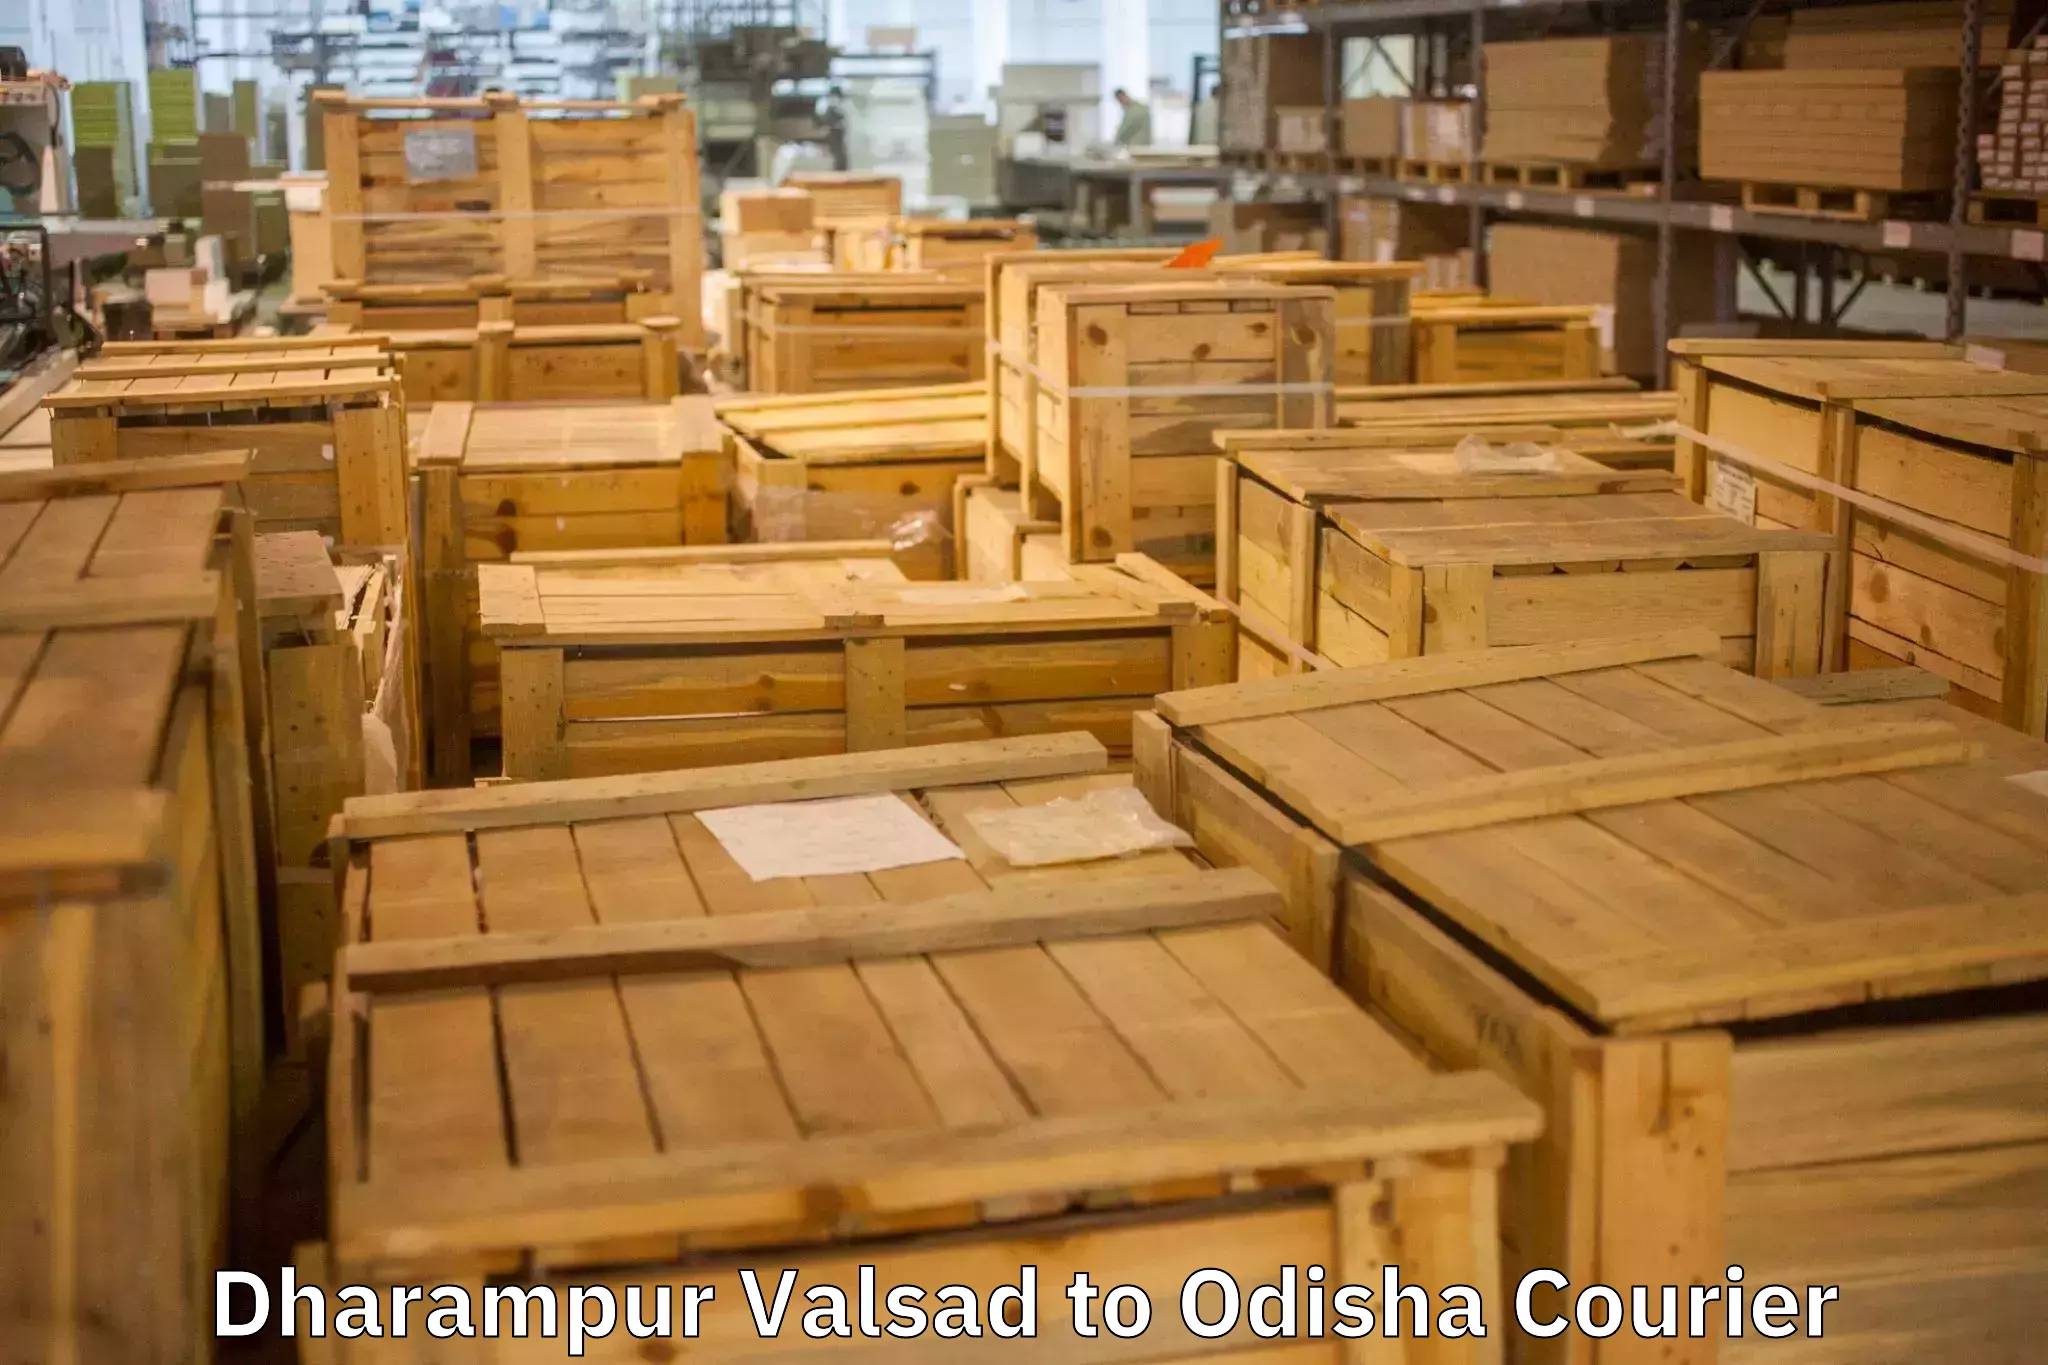 Home relocation experts Dharampur Valsad to Dukura